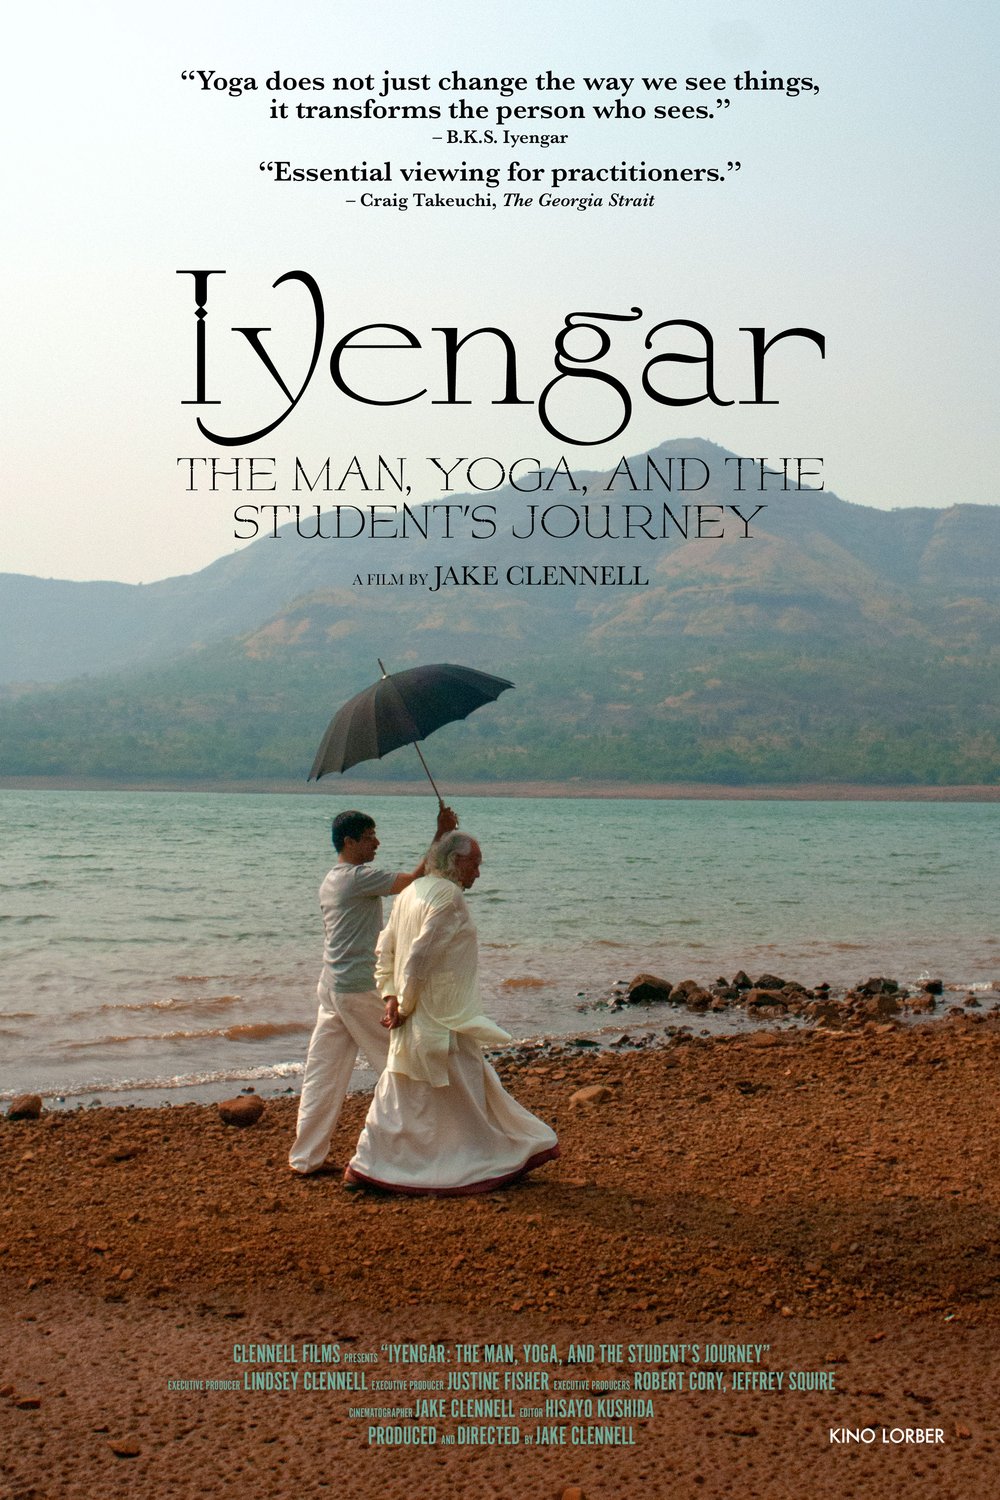 L'affiche du film Iyengar: The man, yoga, and the student's journey